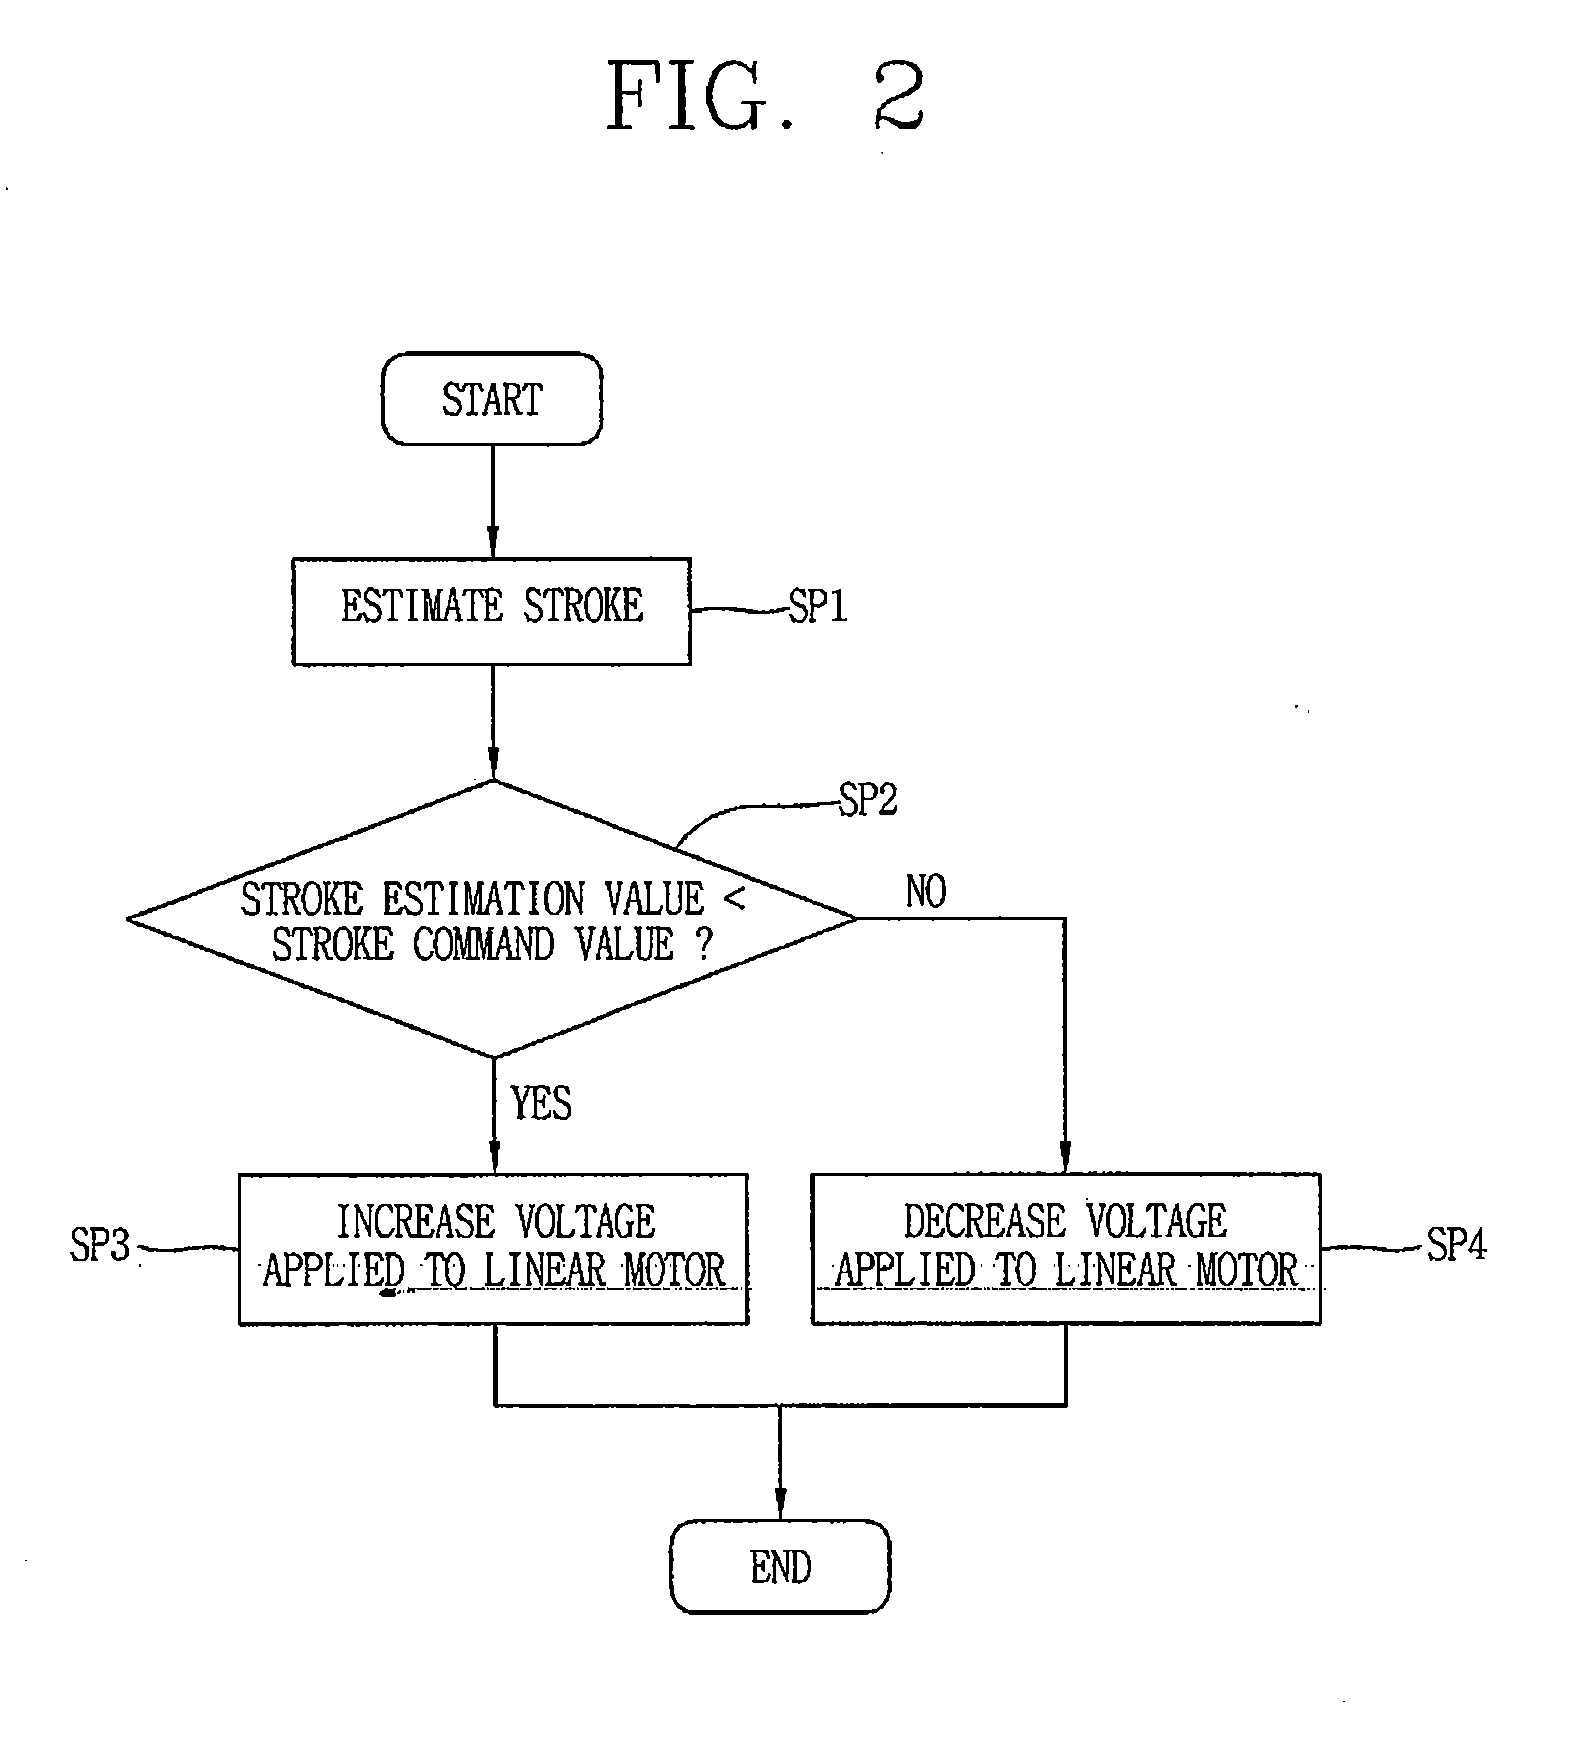 Driving controlling apparatus for linear compressor and method thereof